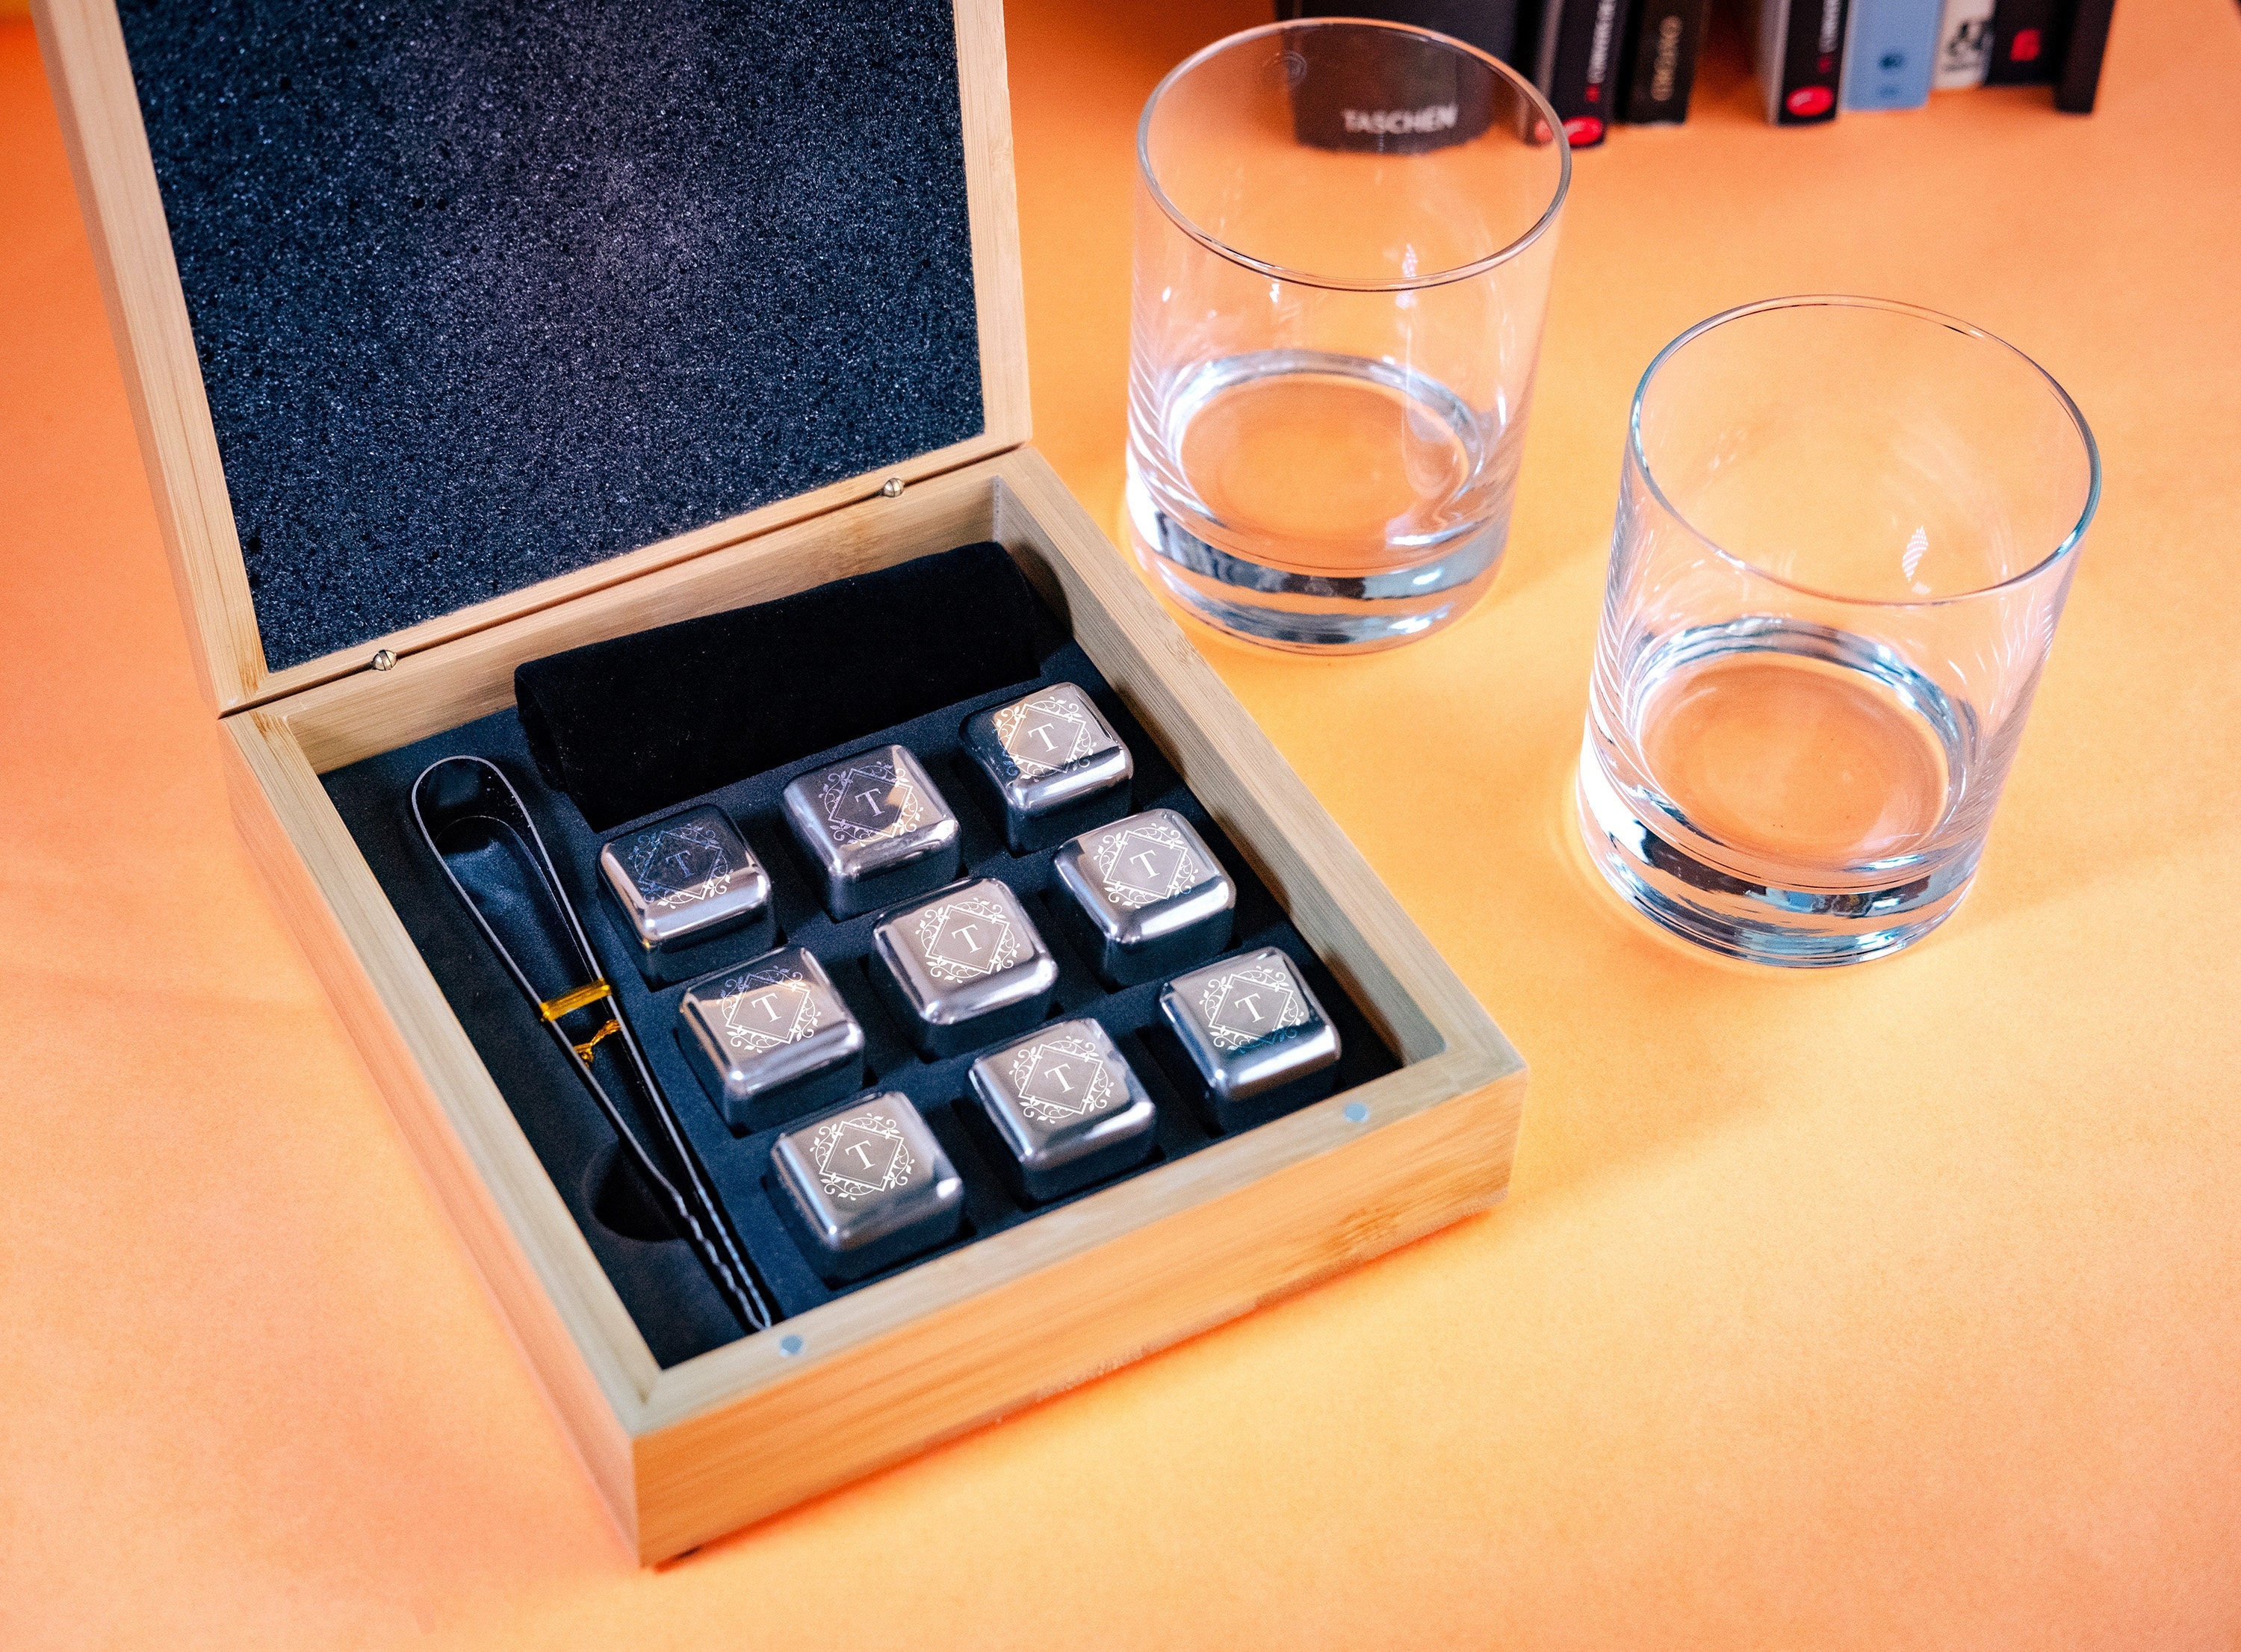  Whiskey Set Gifts for Men,Whiskey Stones & Whiskey Glasses Set  of 2, Whisky Rocks Anniversary Best Groomsmen Dad Birthday Valentines Day  Gifts Ideas for Him Mens Male Friends Wedding Husband Brother